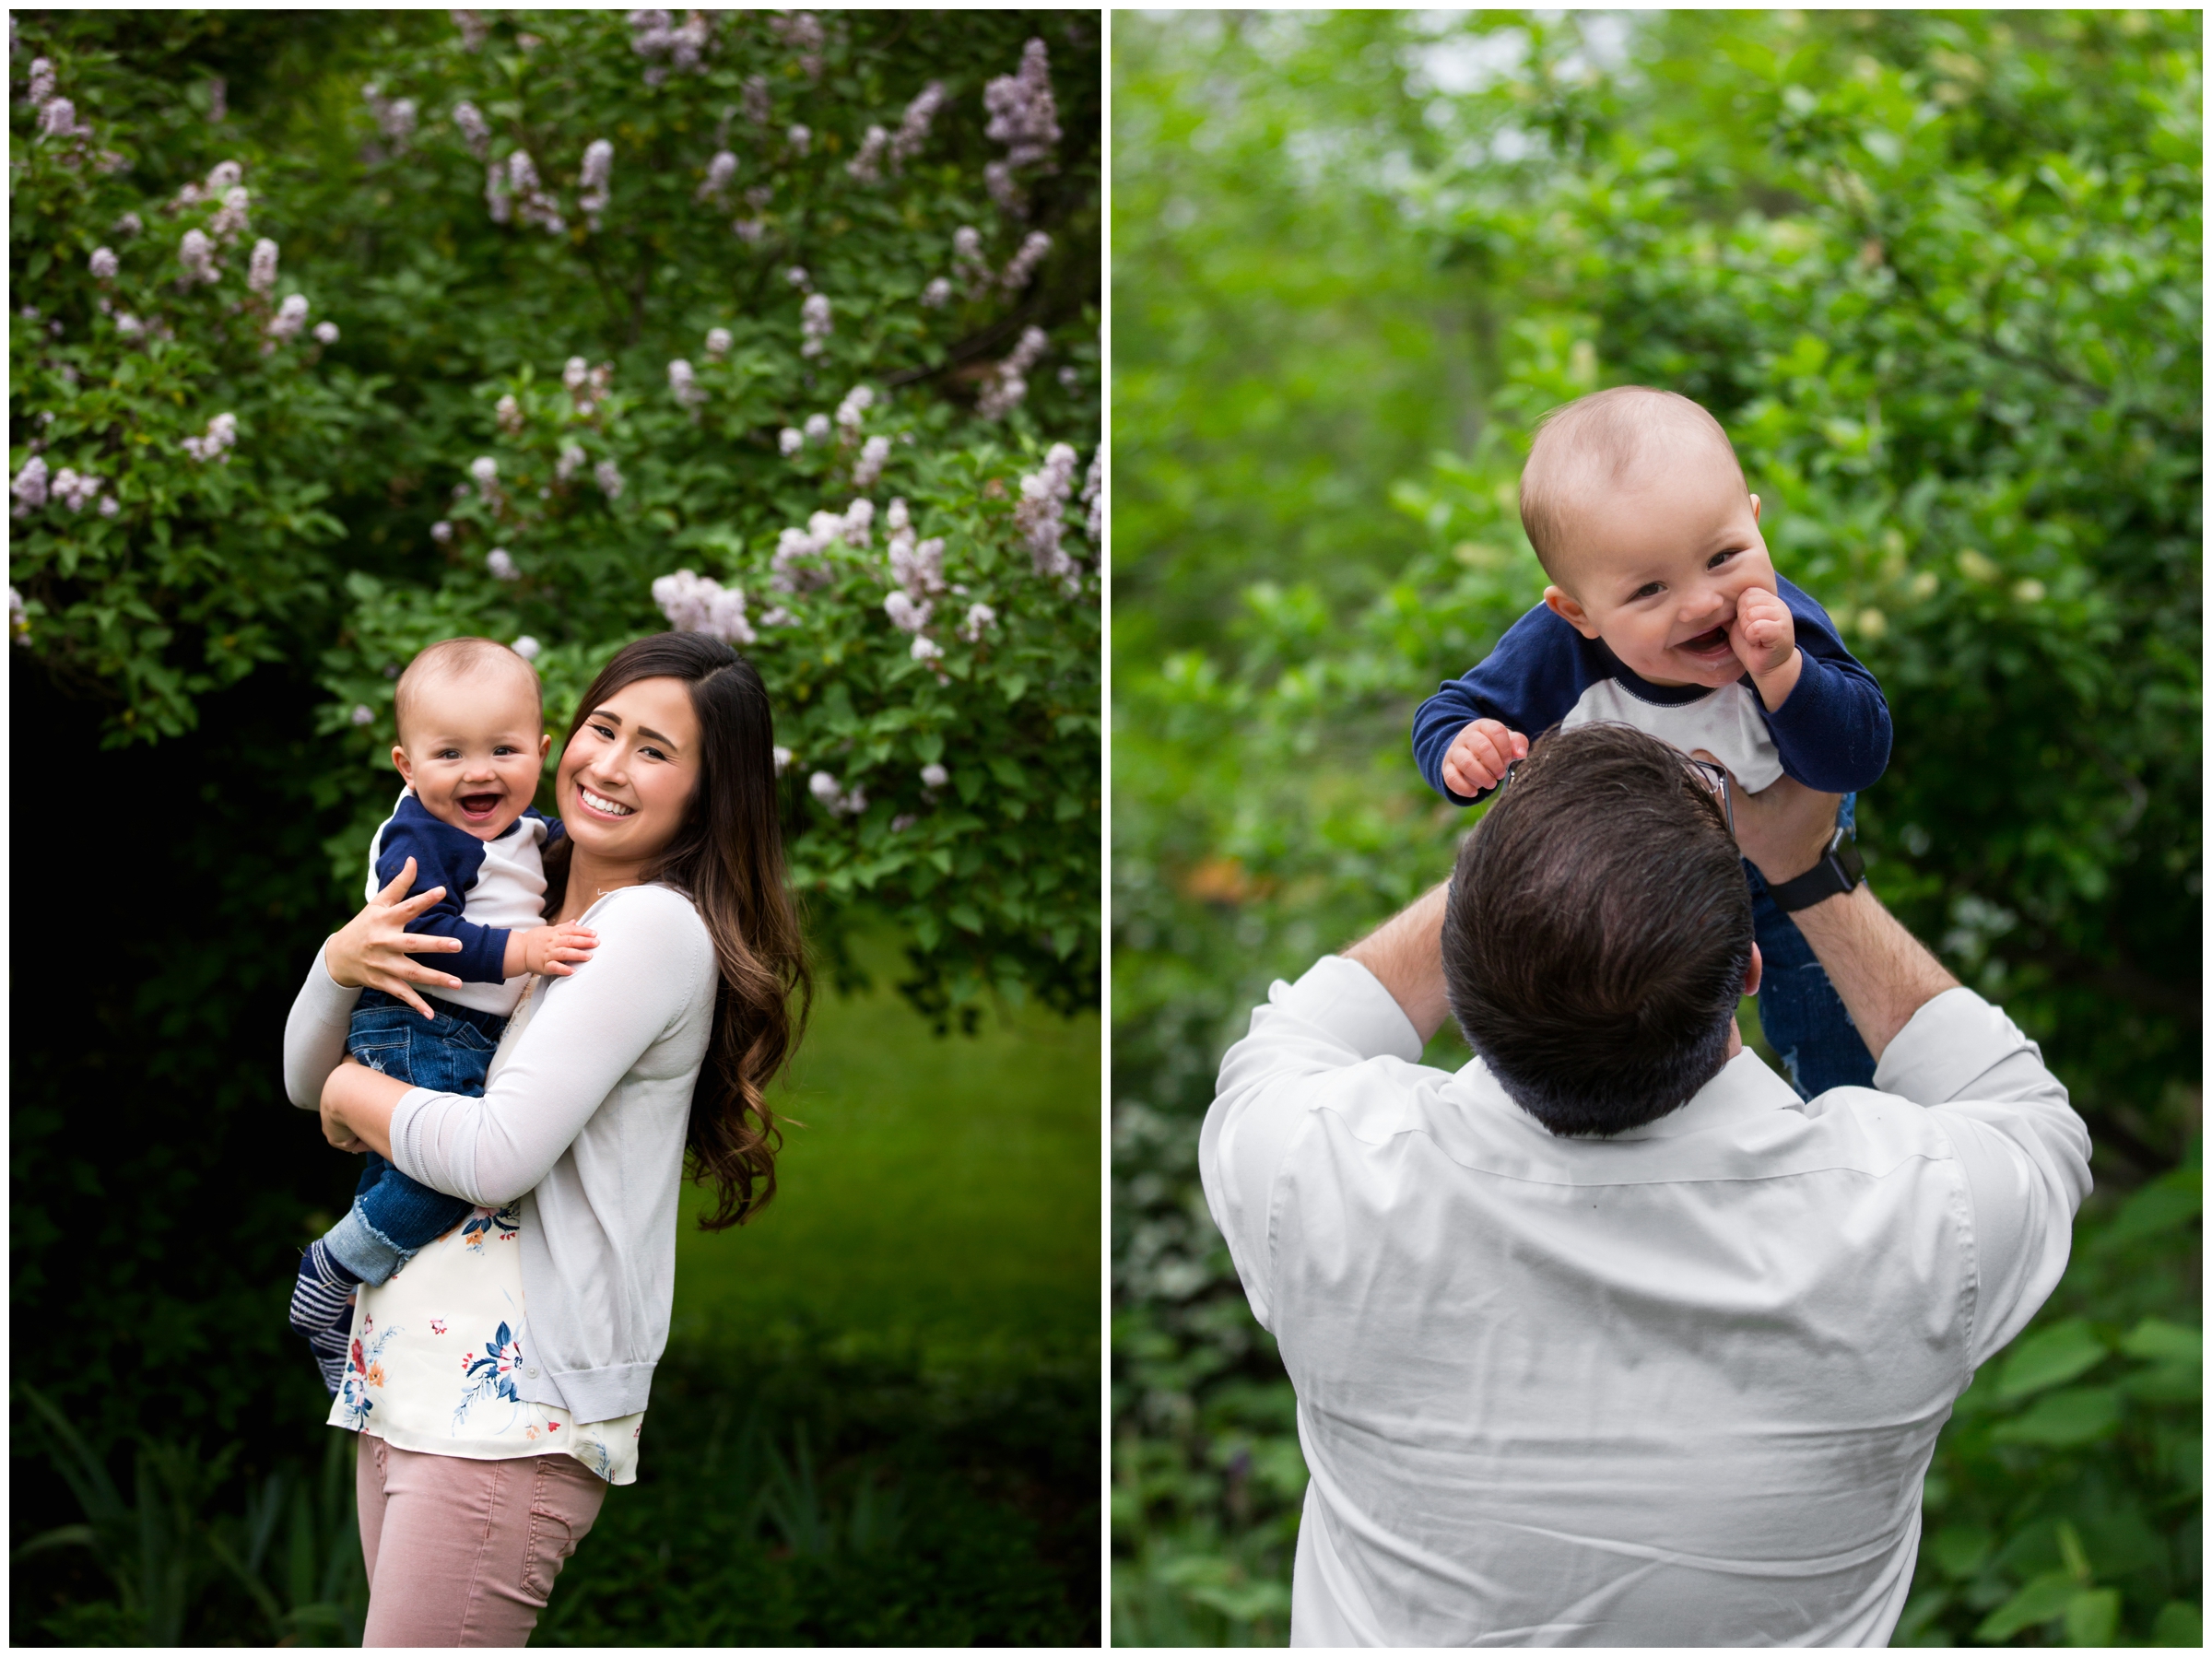 family photography inspiration by best Longmont family photographers Plum Pretty Photo 